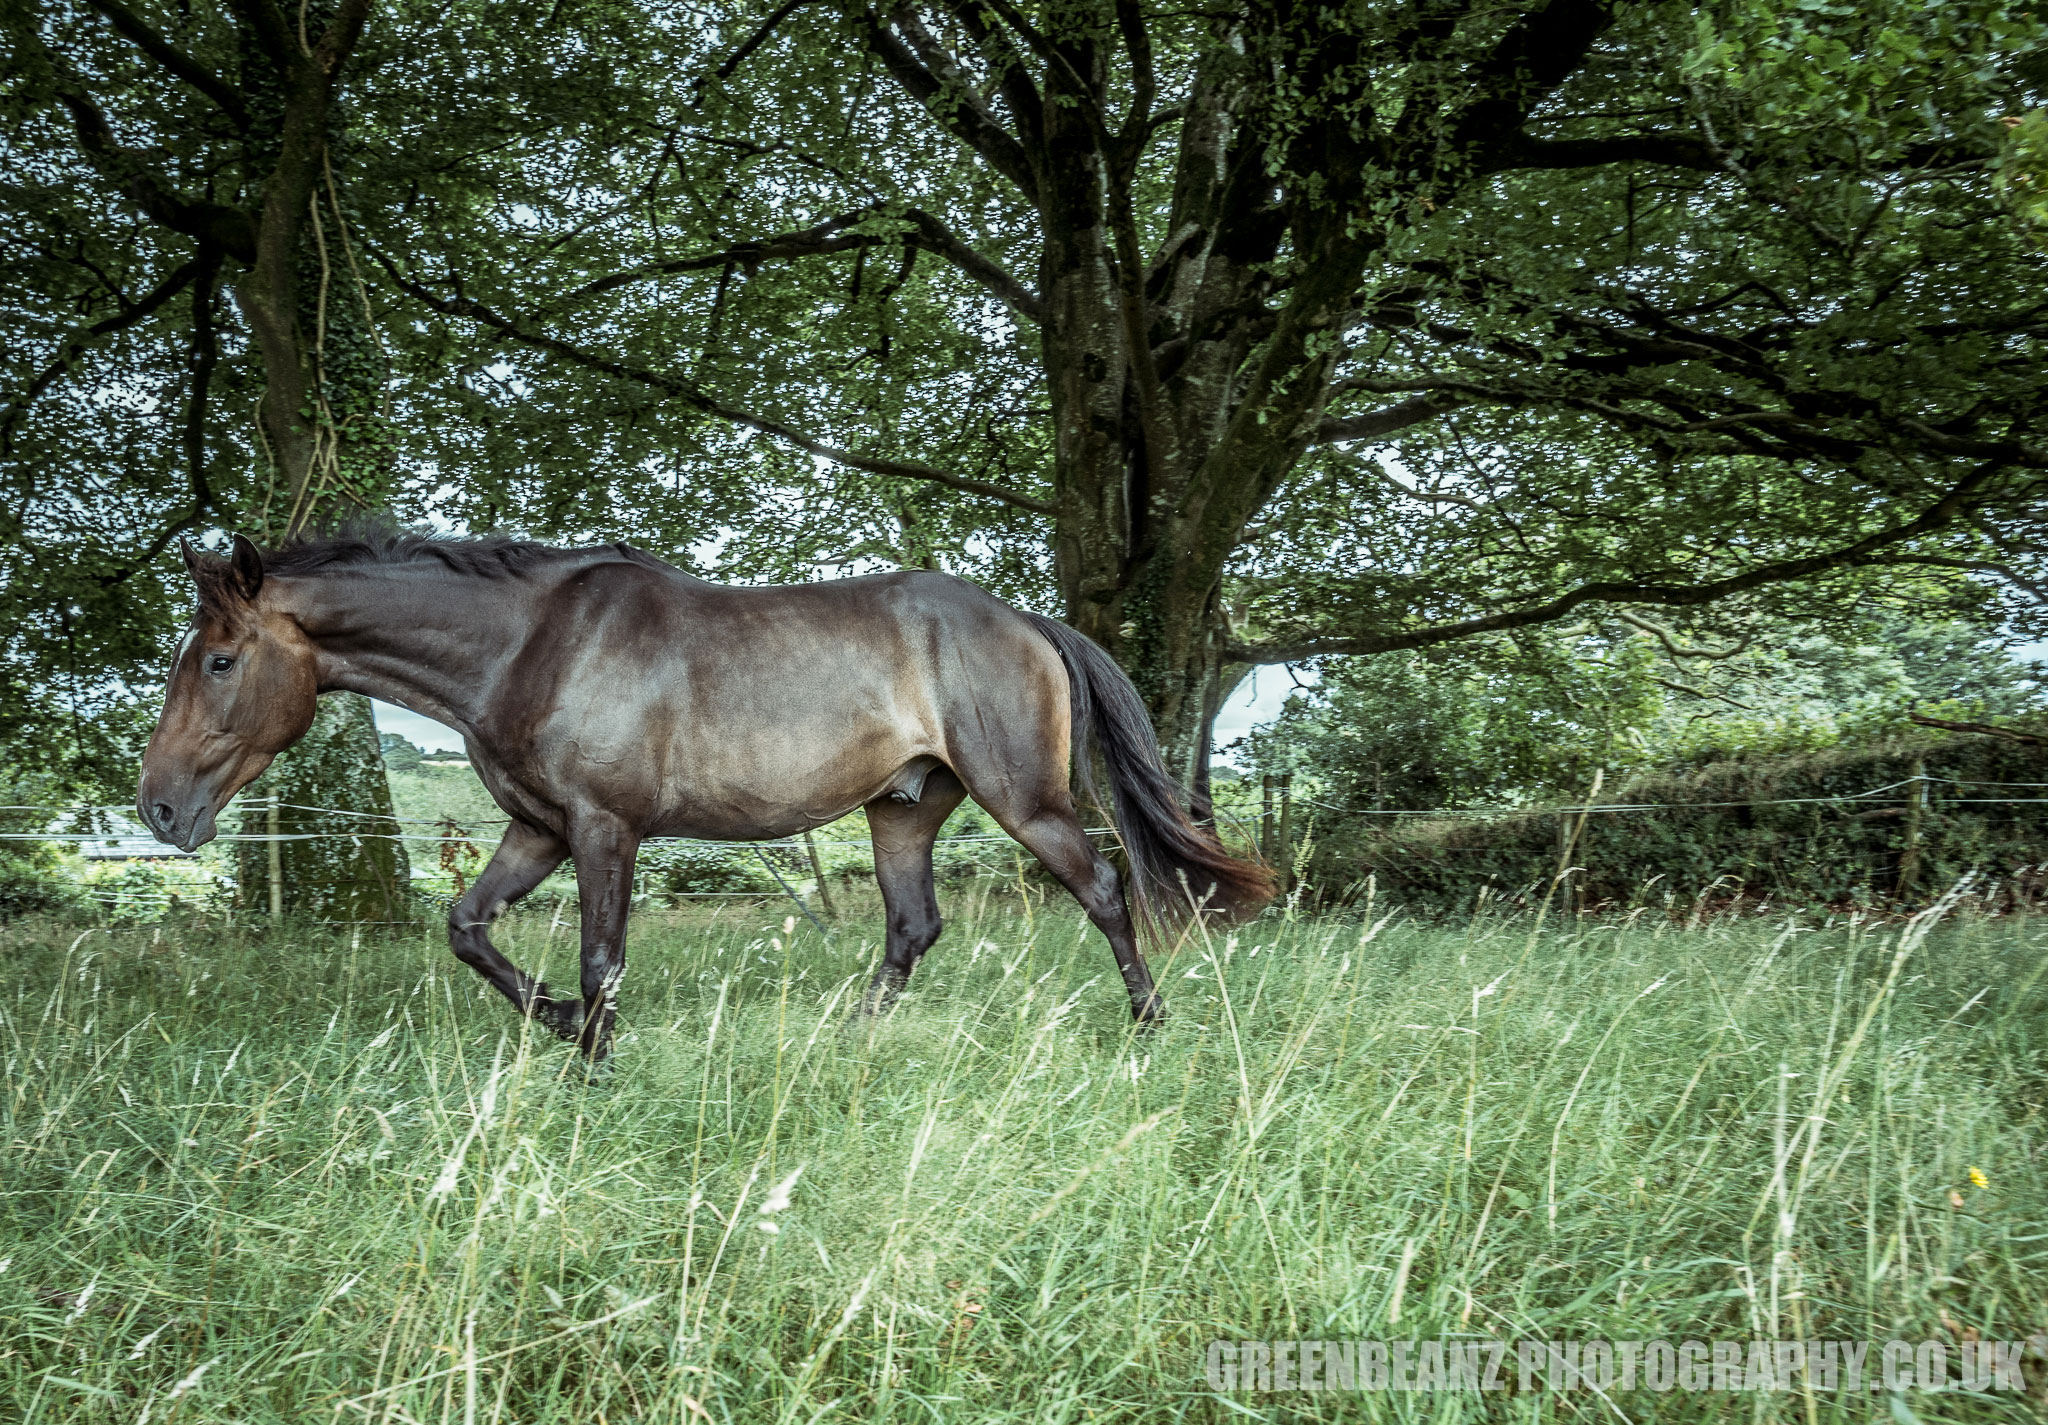 Horse with grass in foreground and trees behind